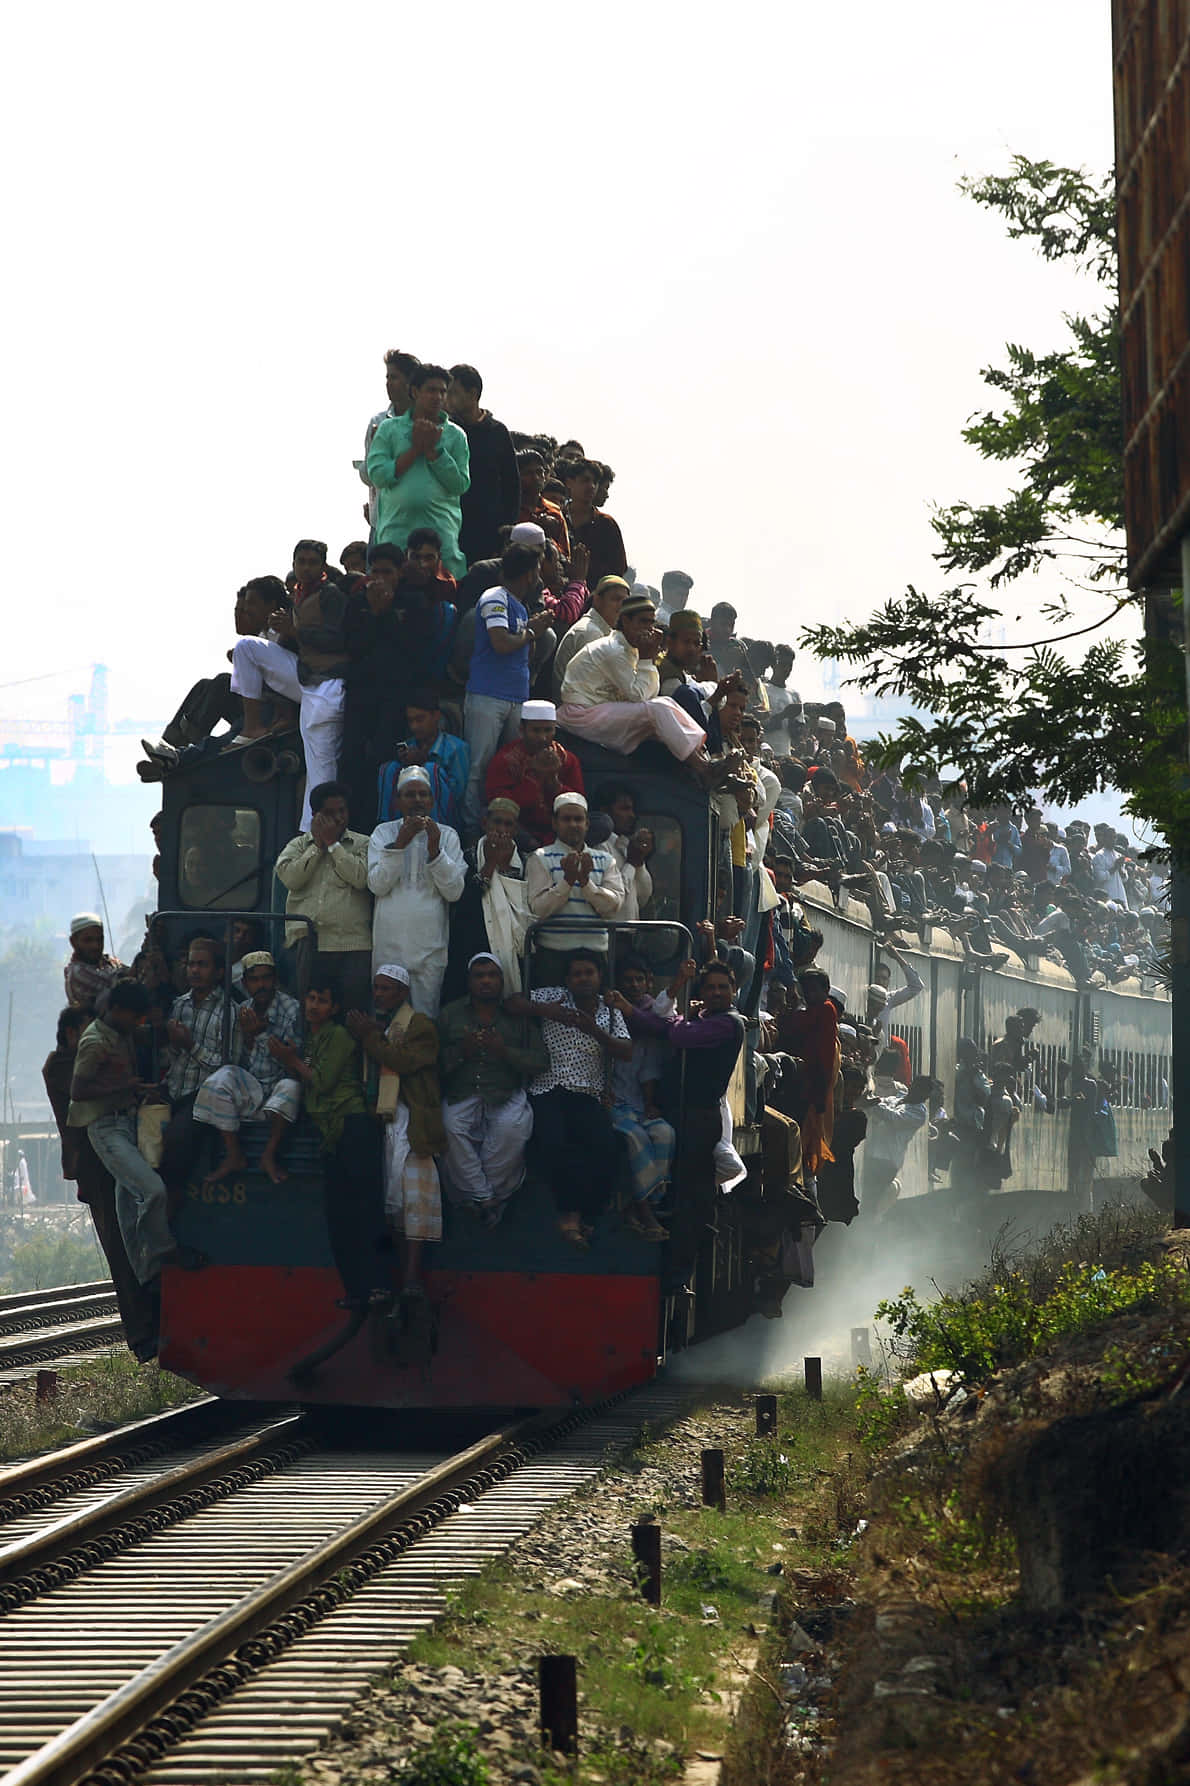 A Train With Many People On It